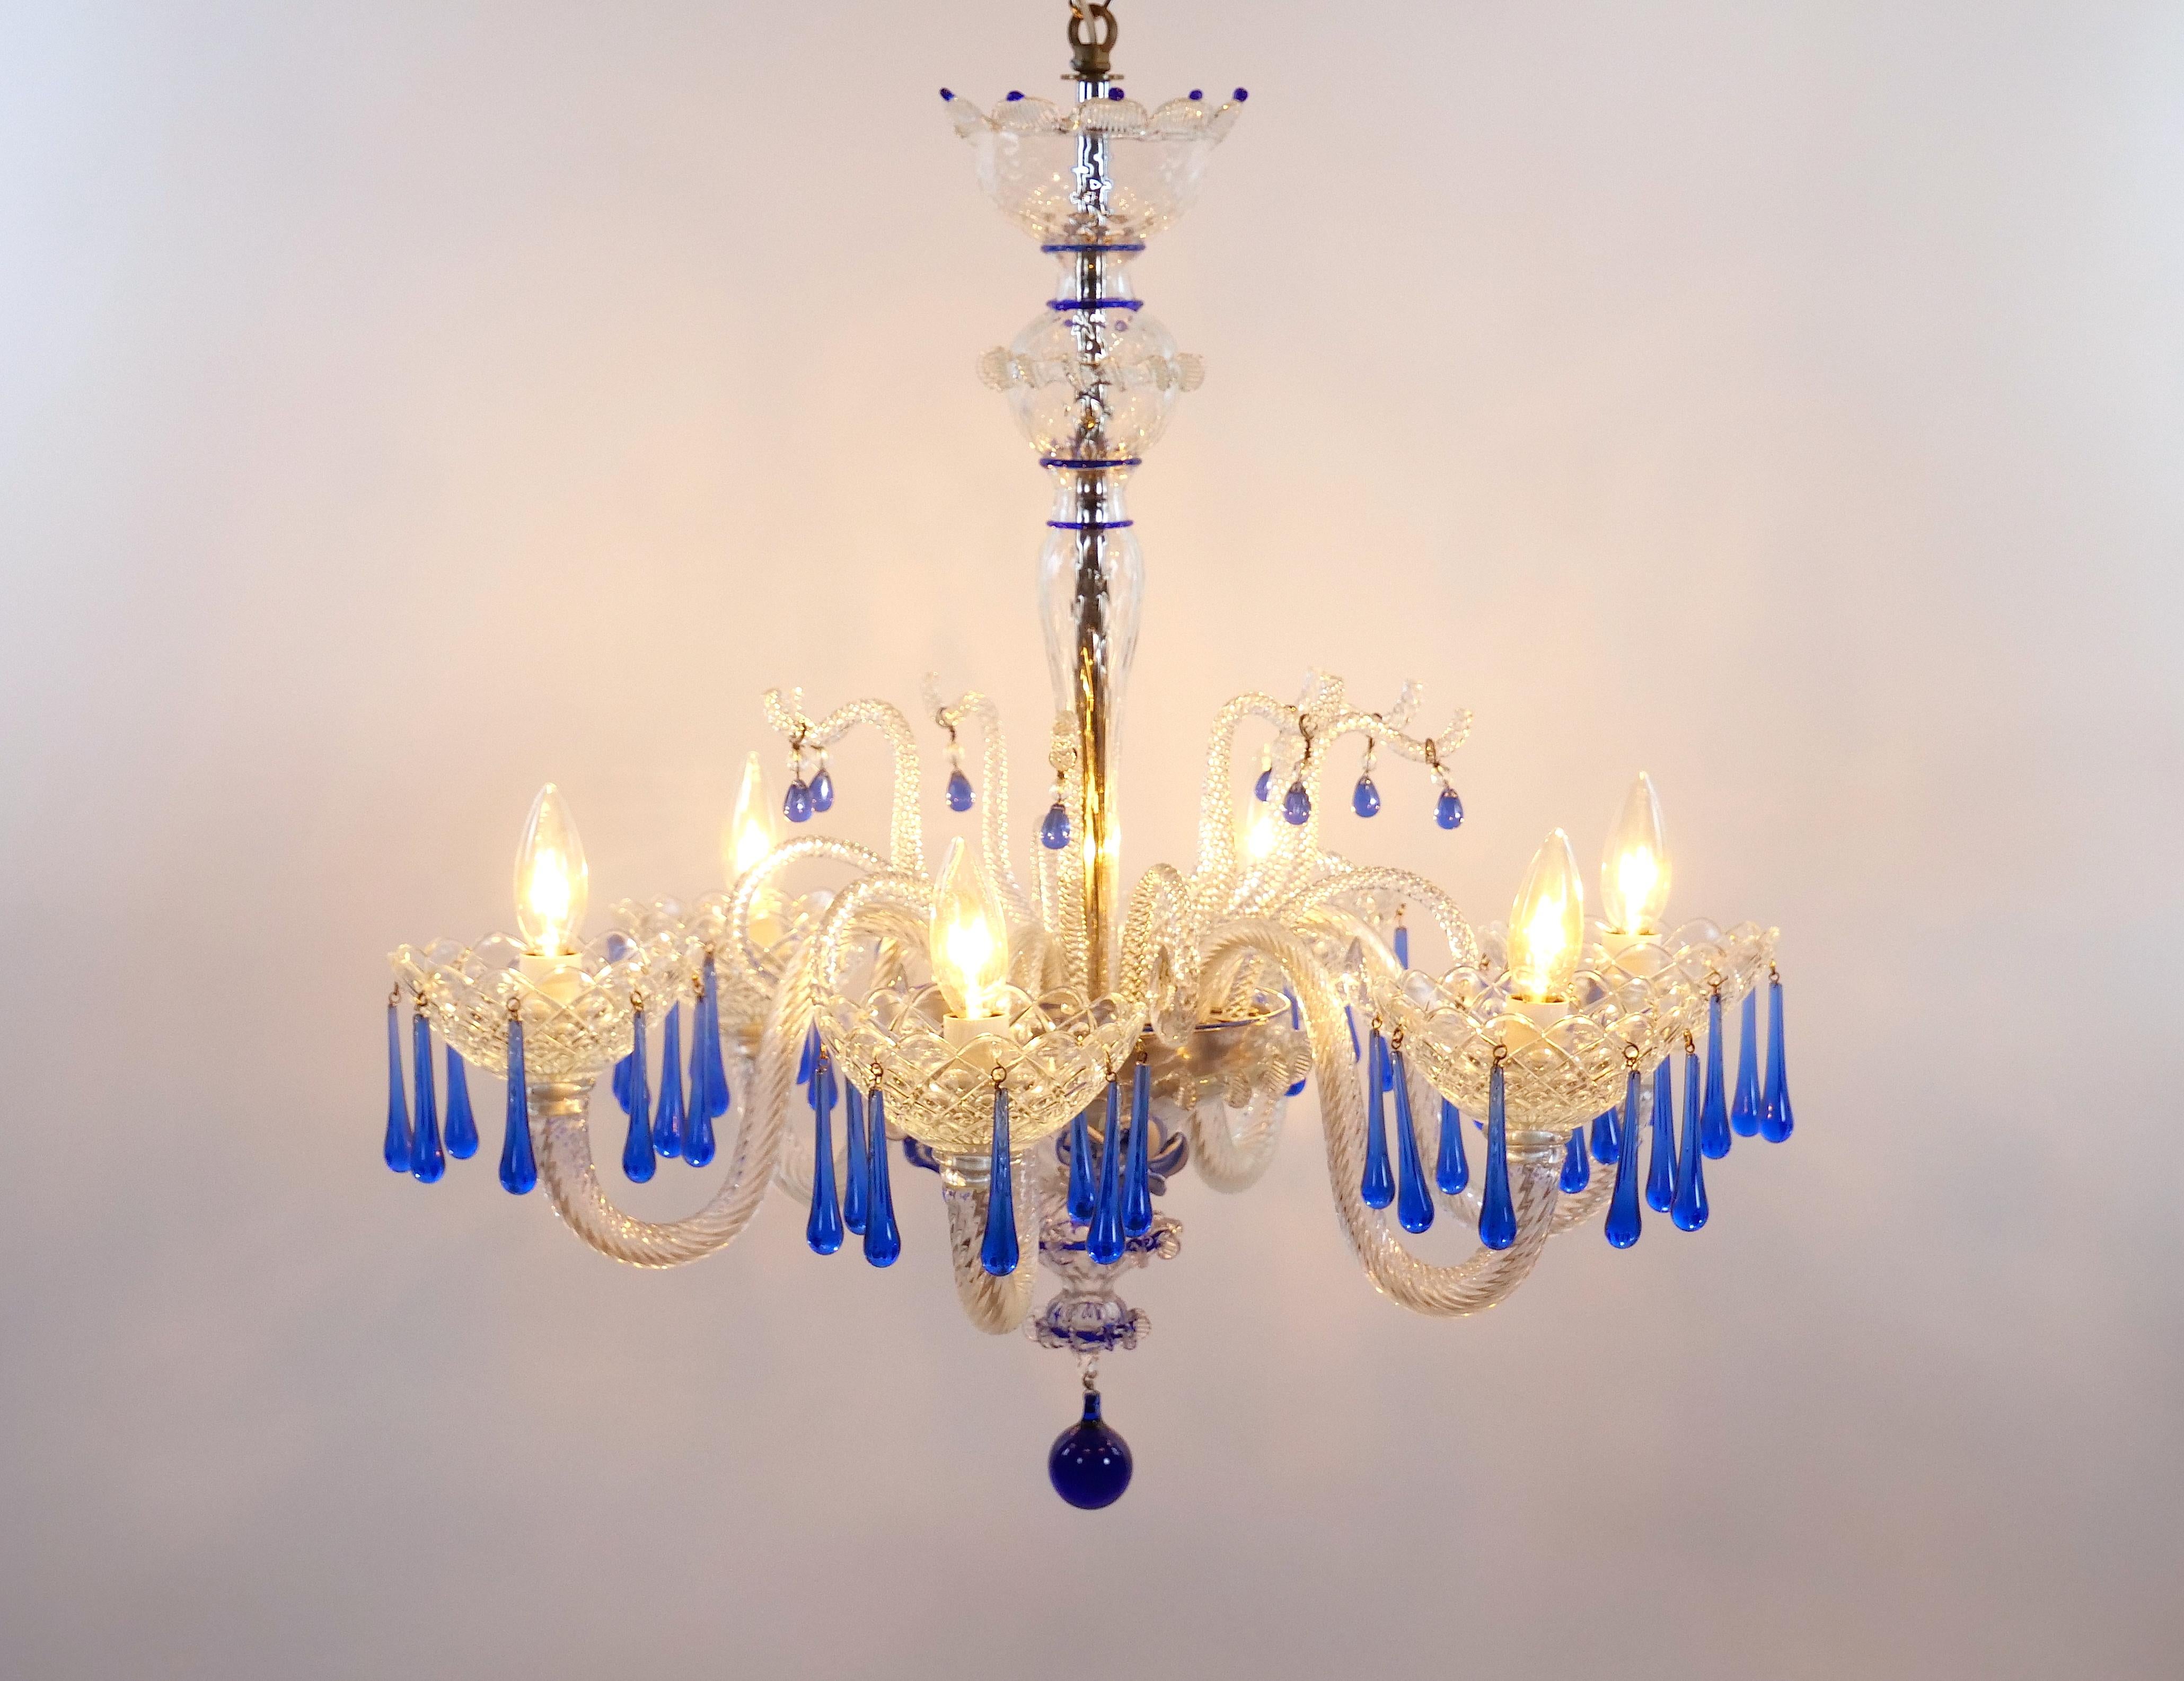 
Indulge in the timeless beauty of this vintage Venetian Italian Murano glass chandelier, a true testament to craftsmanship and elegance. The clear glass standard is adorned with a breathtaking array of blue and white flower heads, each intricately